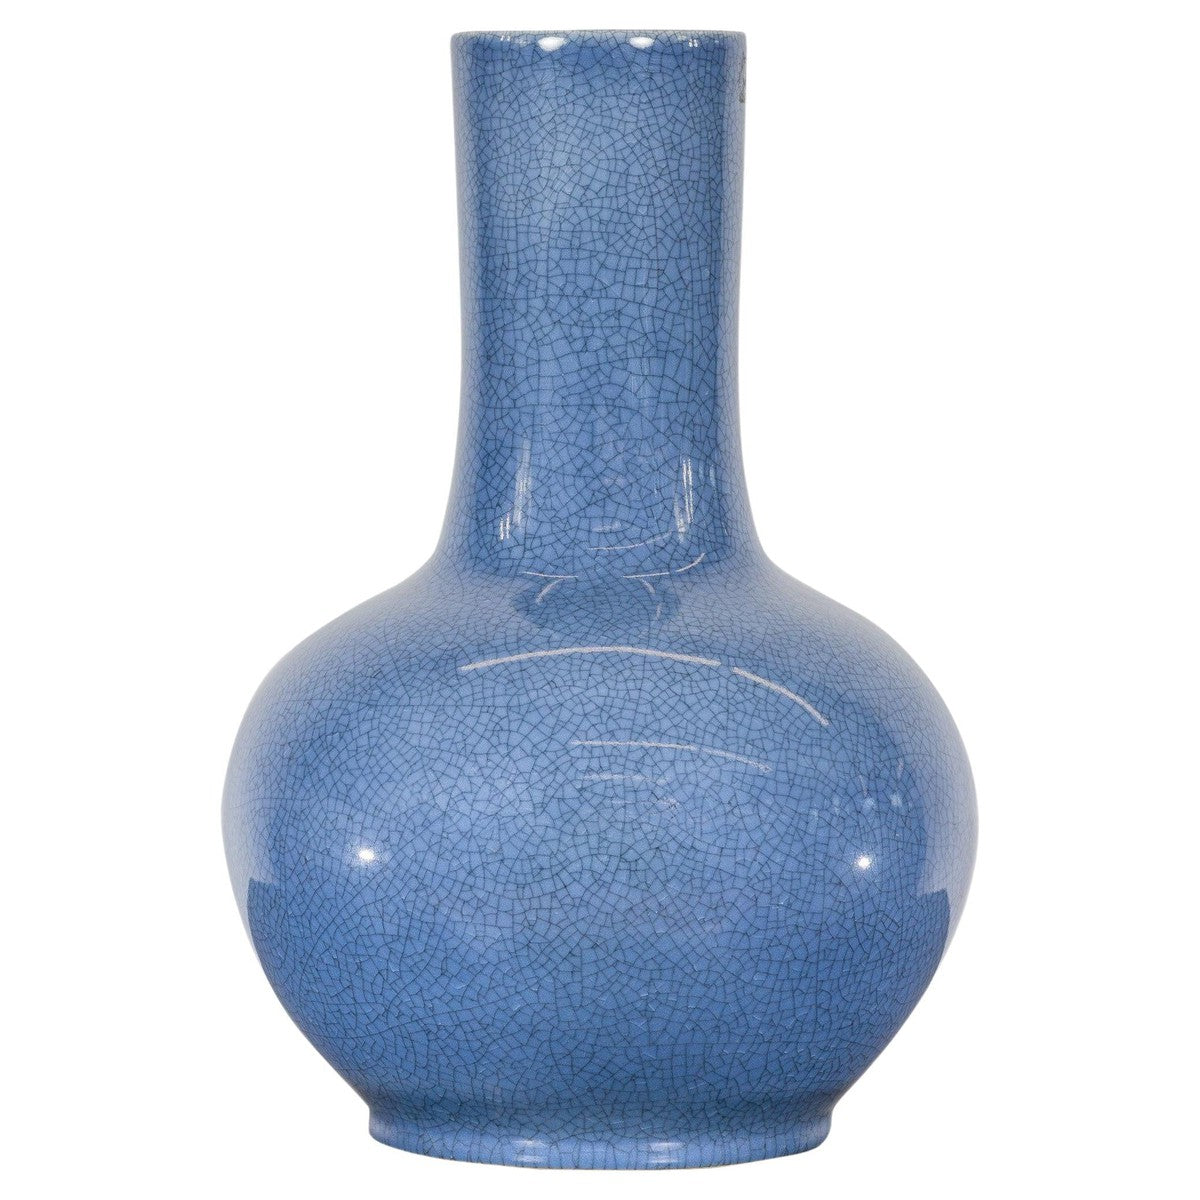 Vintage Minimalist Crackle Blue Vase with Generous Rounded Silhouette-YN7815-1. Asian & Chinese Furniture, Art, Antiques, Vintage Home Décor for sale at FEA Home